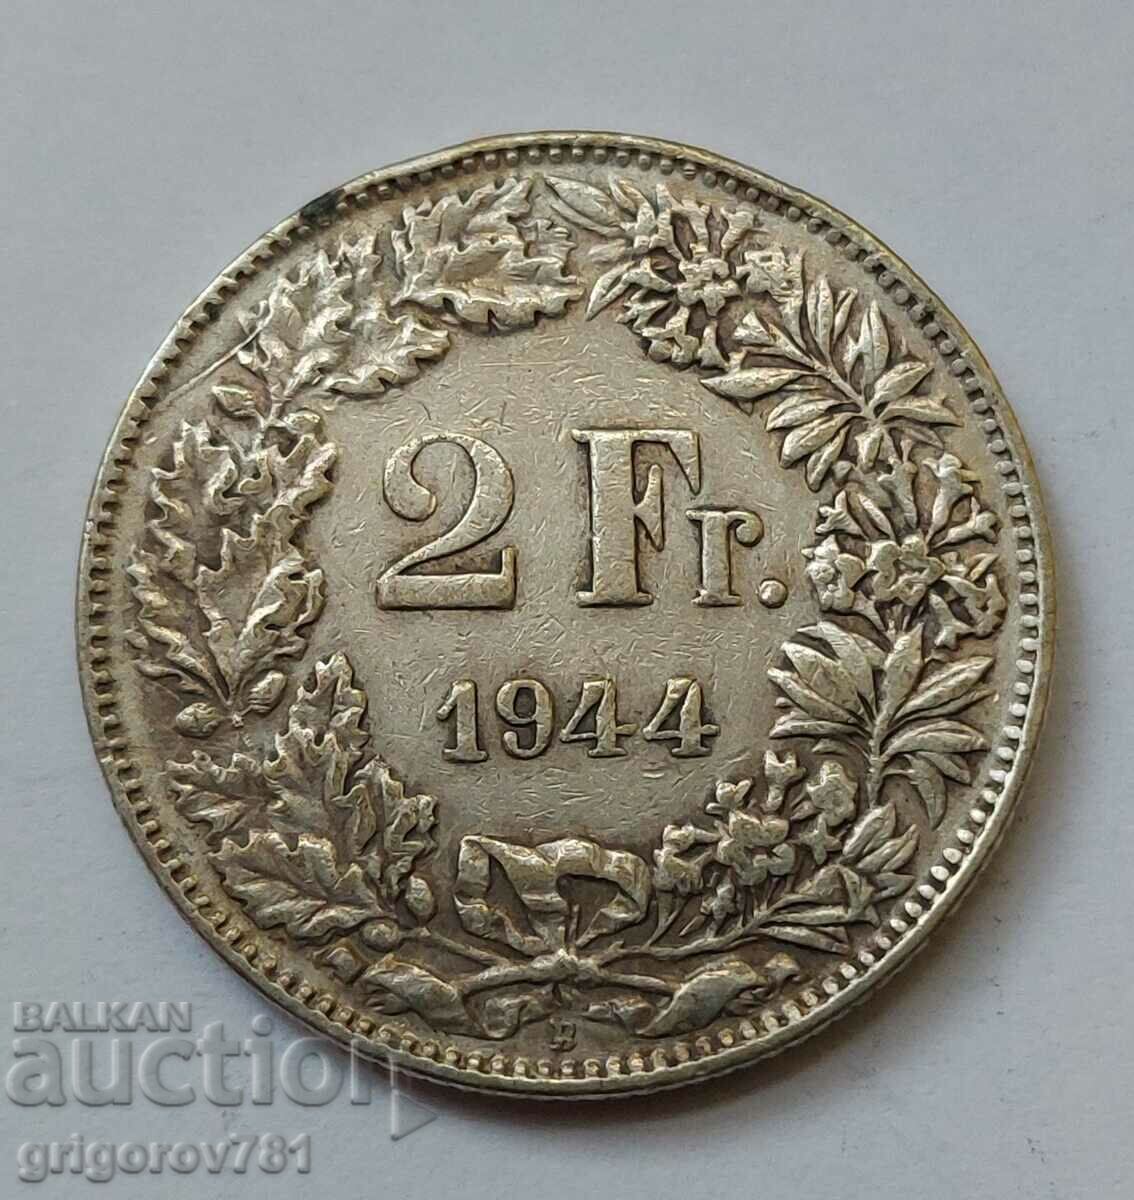 2 Francs Silver Switzerland 1944 B - Silver Coin #2